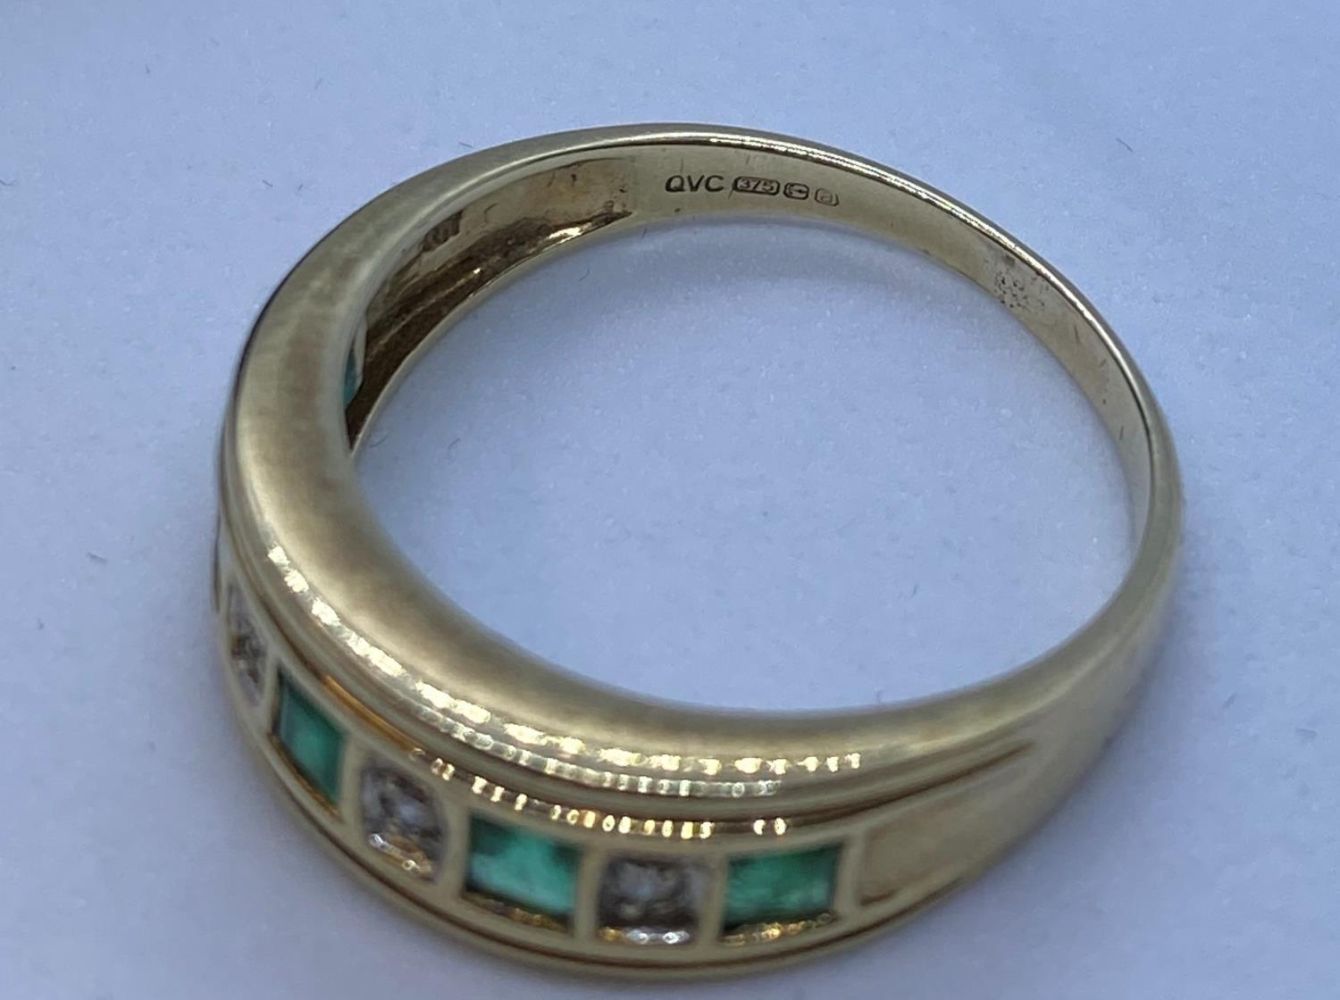 Stone Set Gold Ring Having Emeralds and Diamonds to Top in a Half Eternity Type Setting. 9 Carat - Image 3 of 4